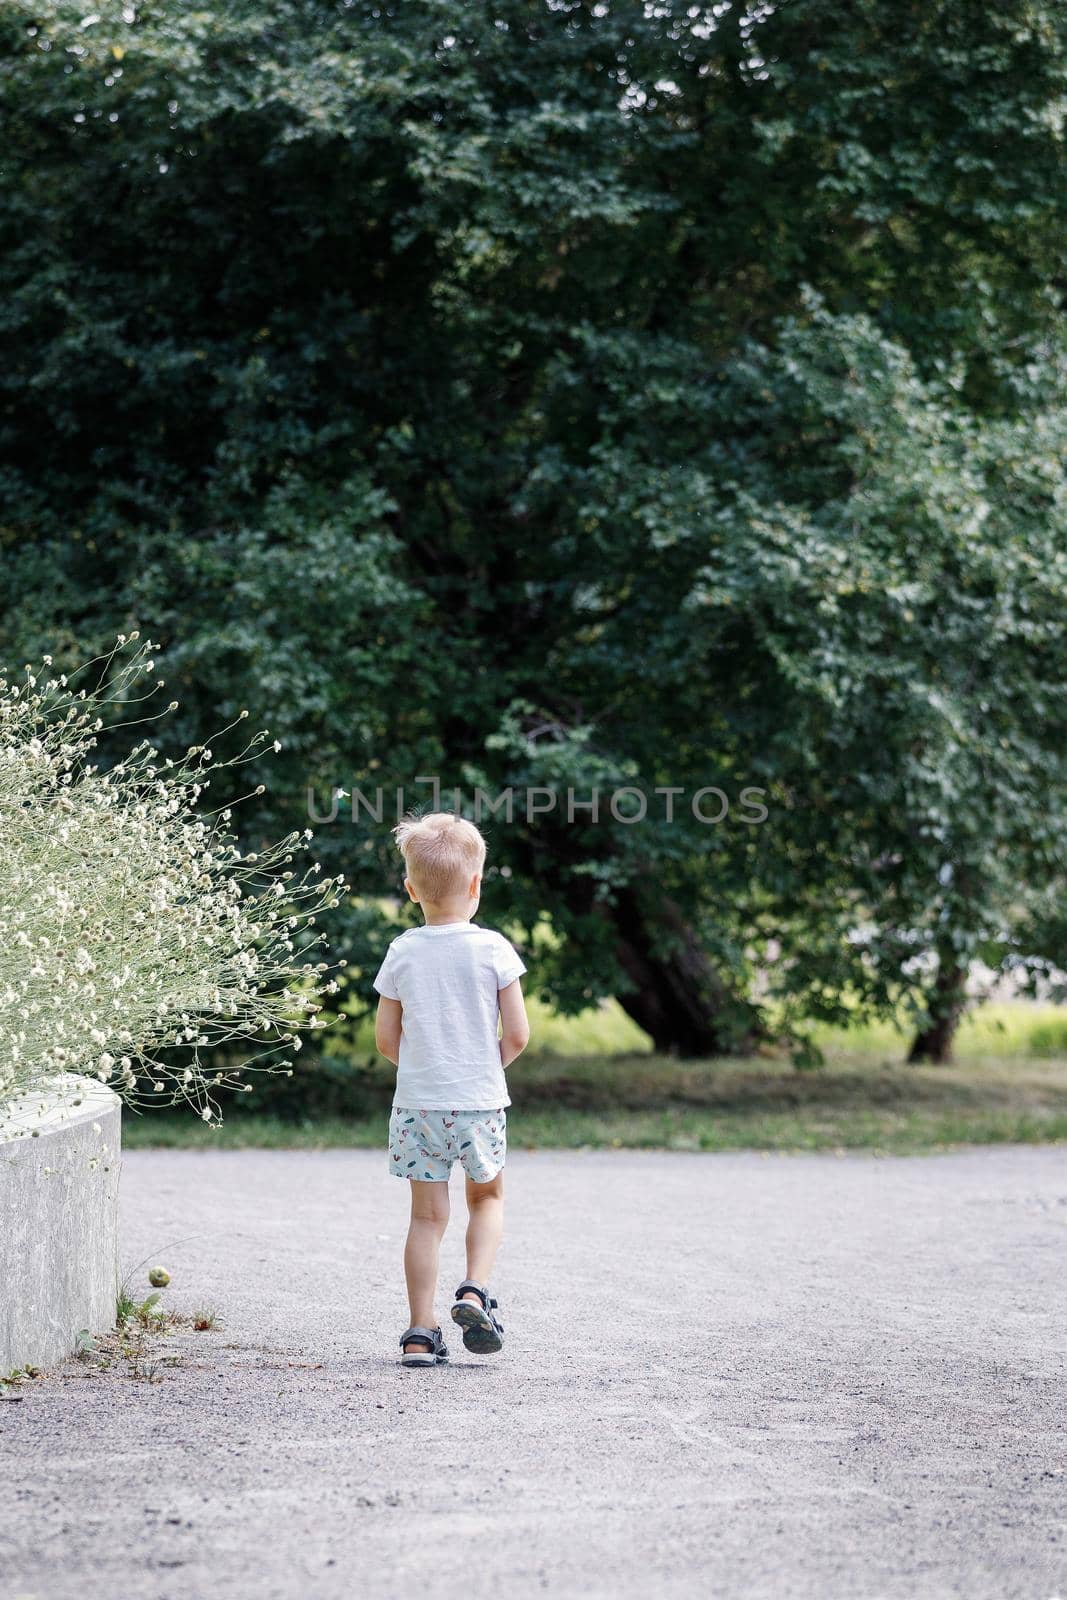 The little boy got lost in the park. The child is alone in the city park. by Lincikas